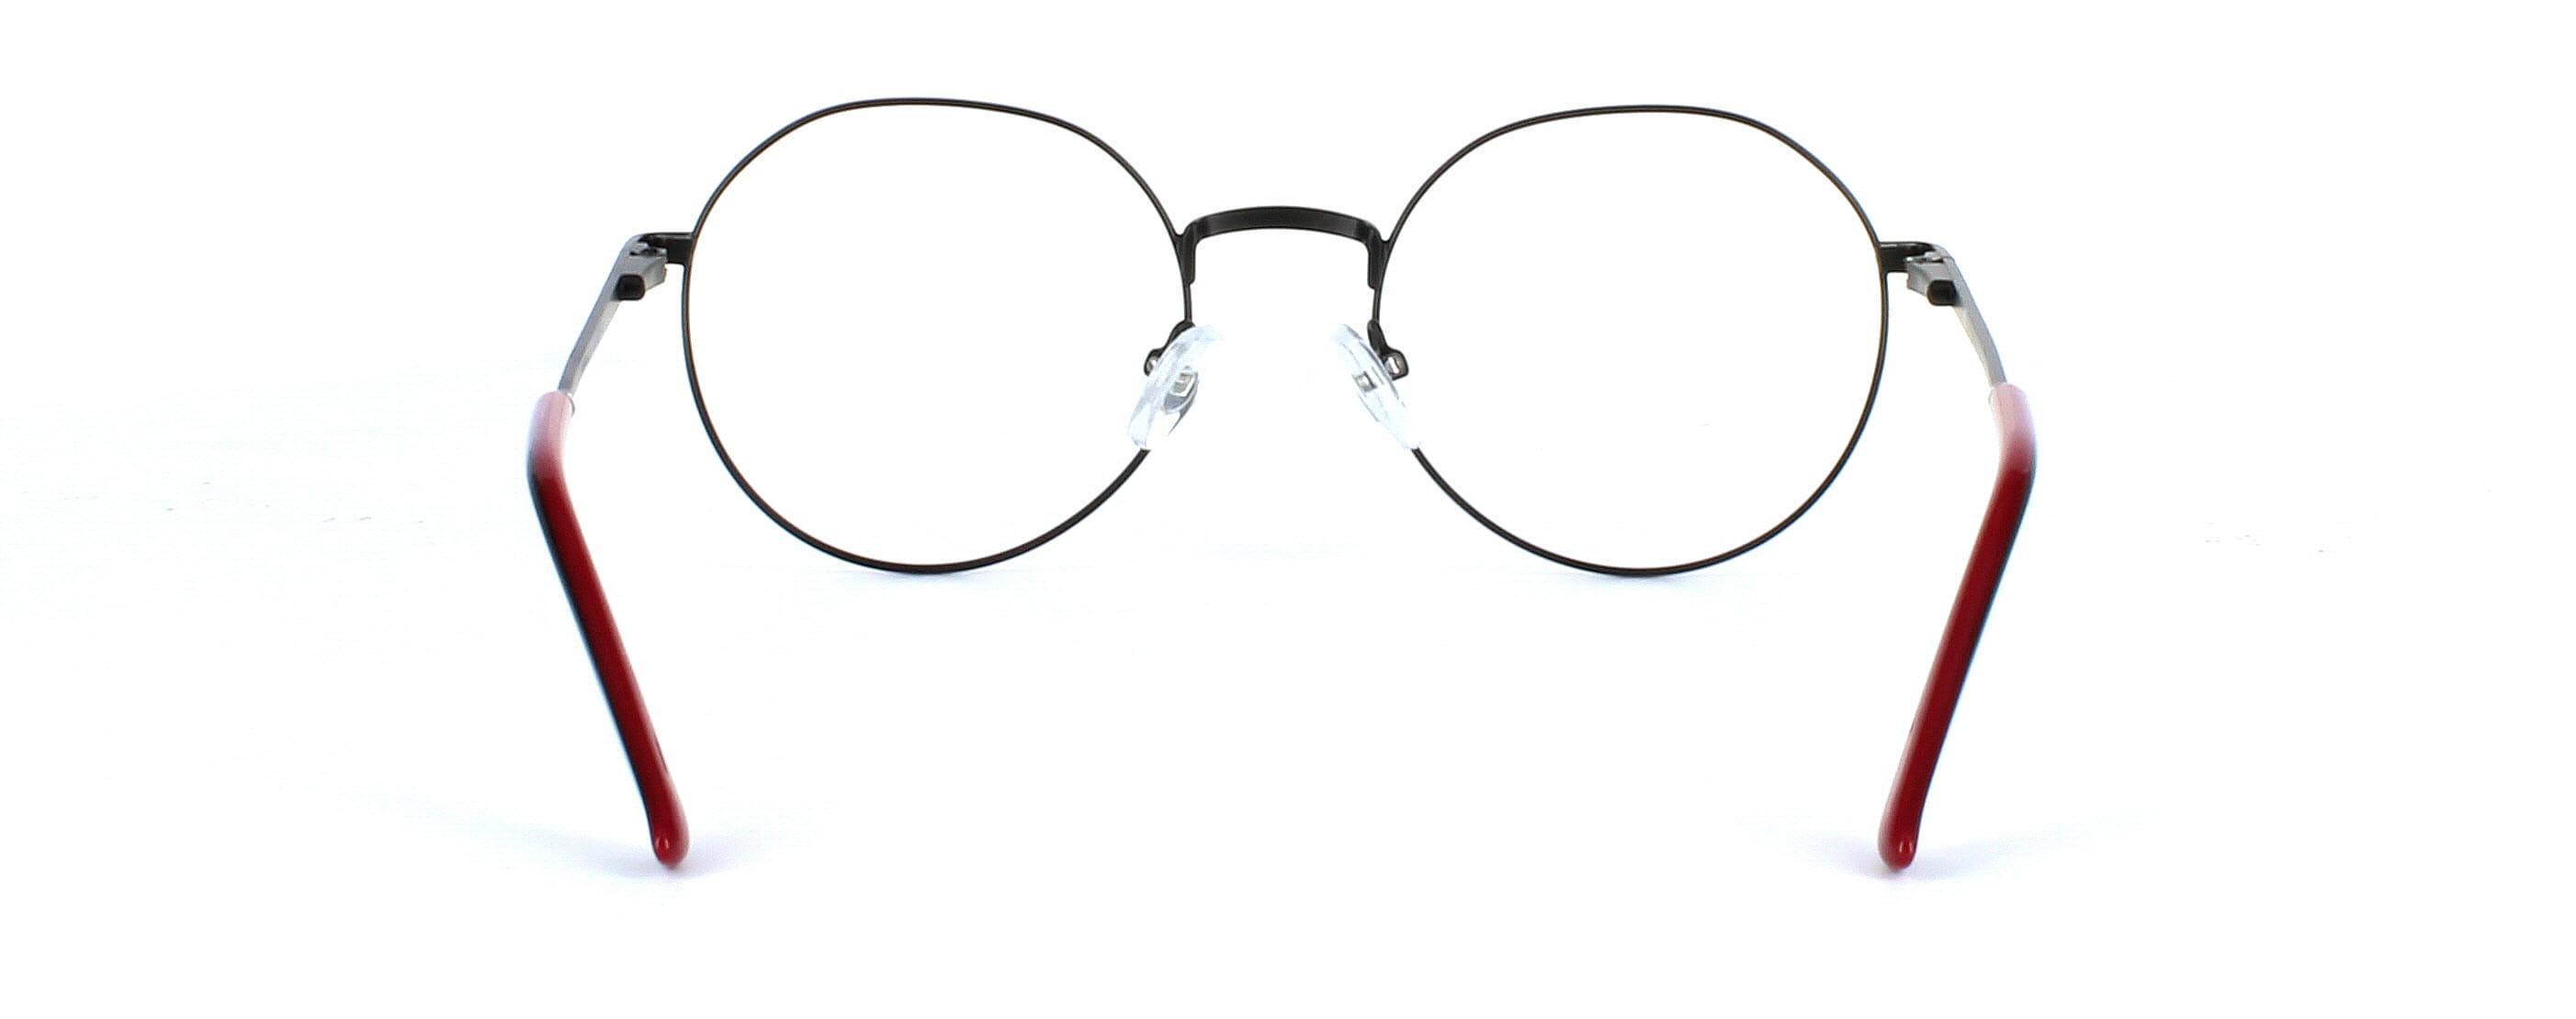 Round shaped unisex metal glasses in black with red arm tips - image view 3